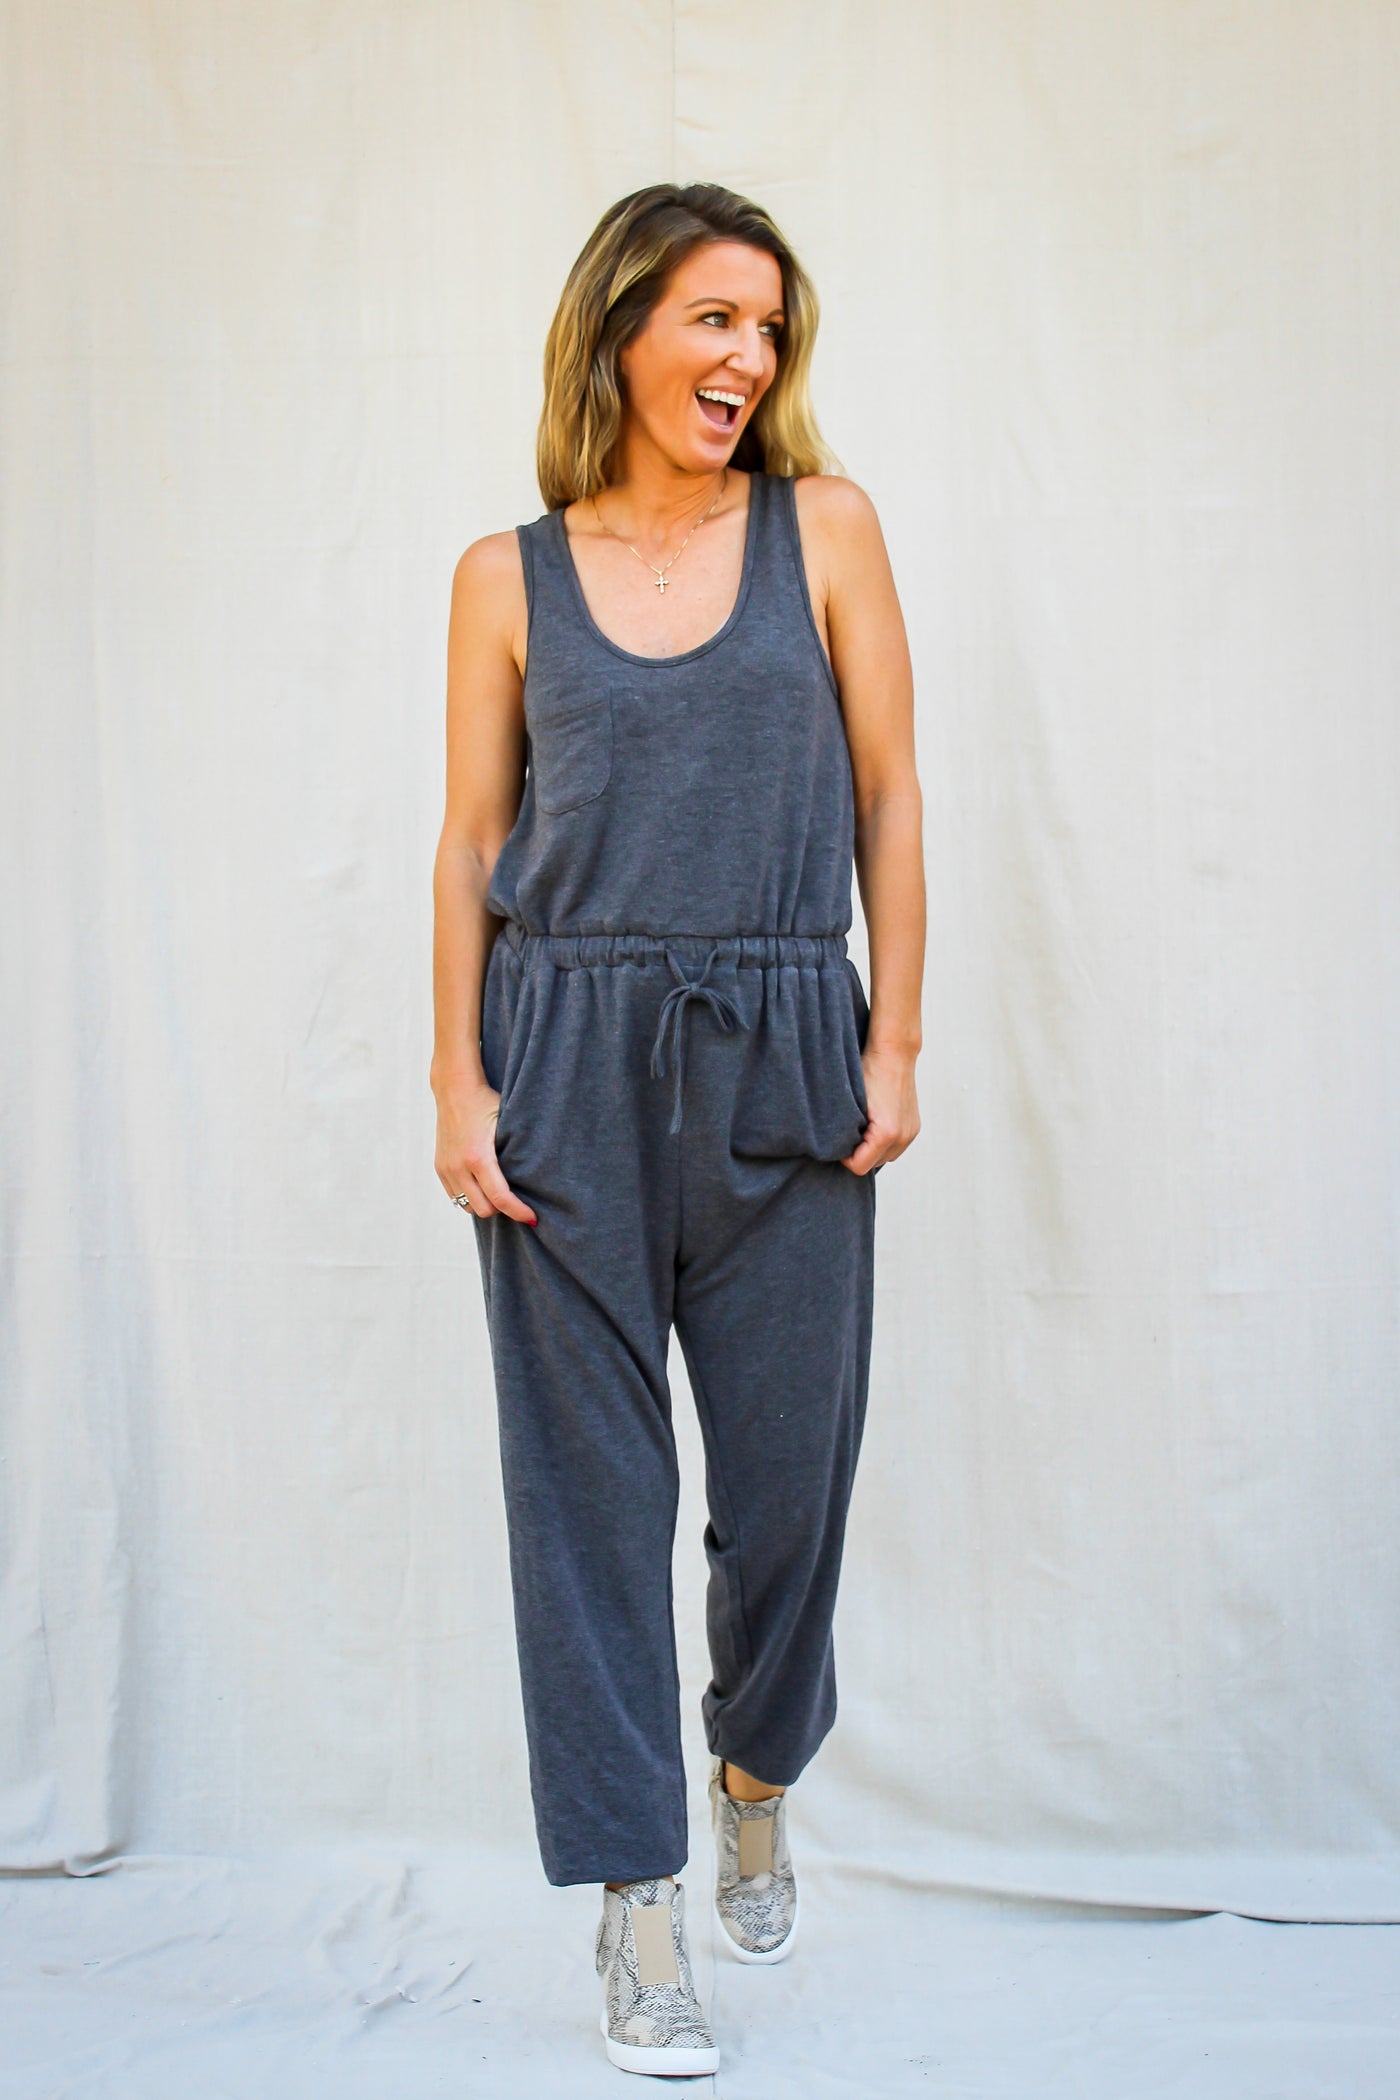 Lazy Days Heathered Charcoal Grey Tee Jumpsuit